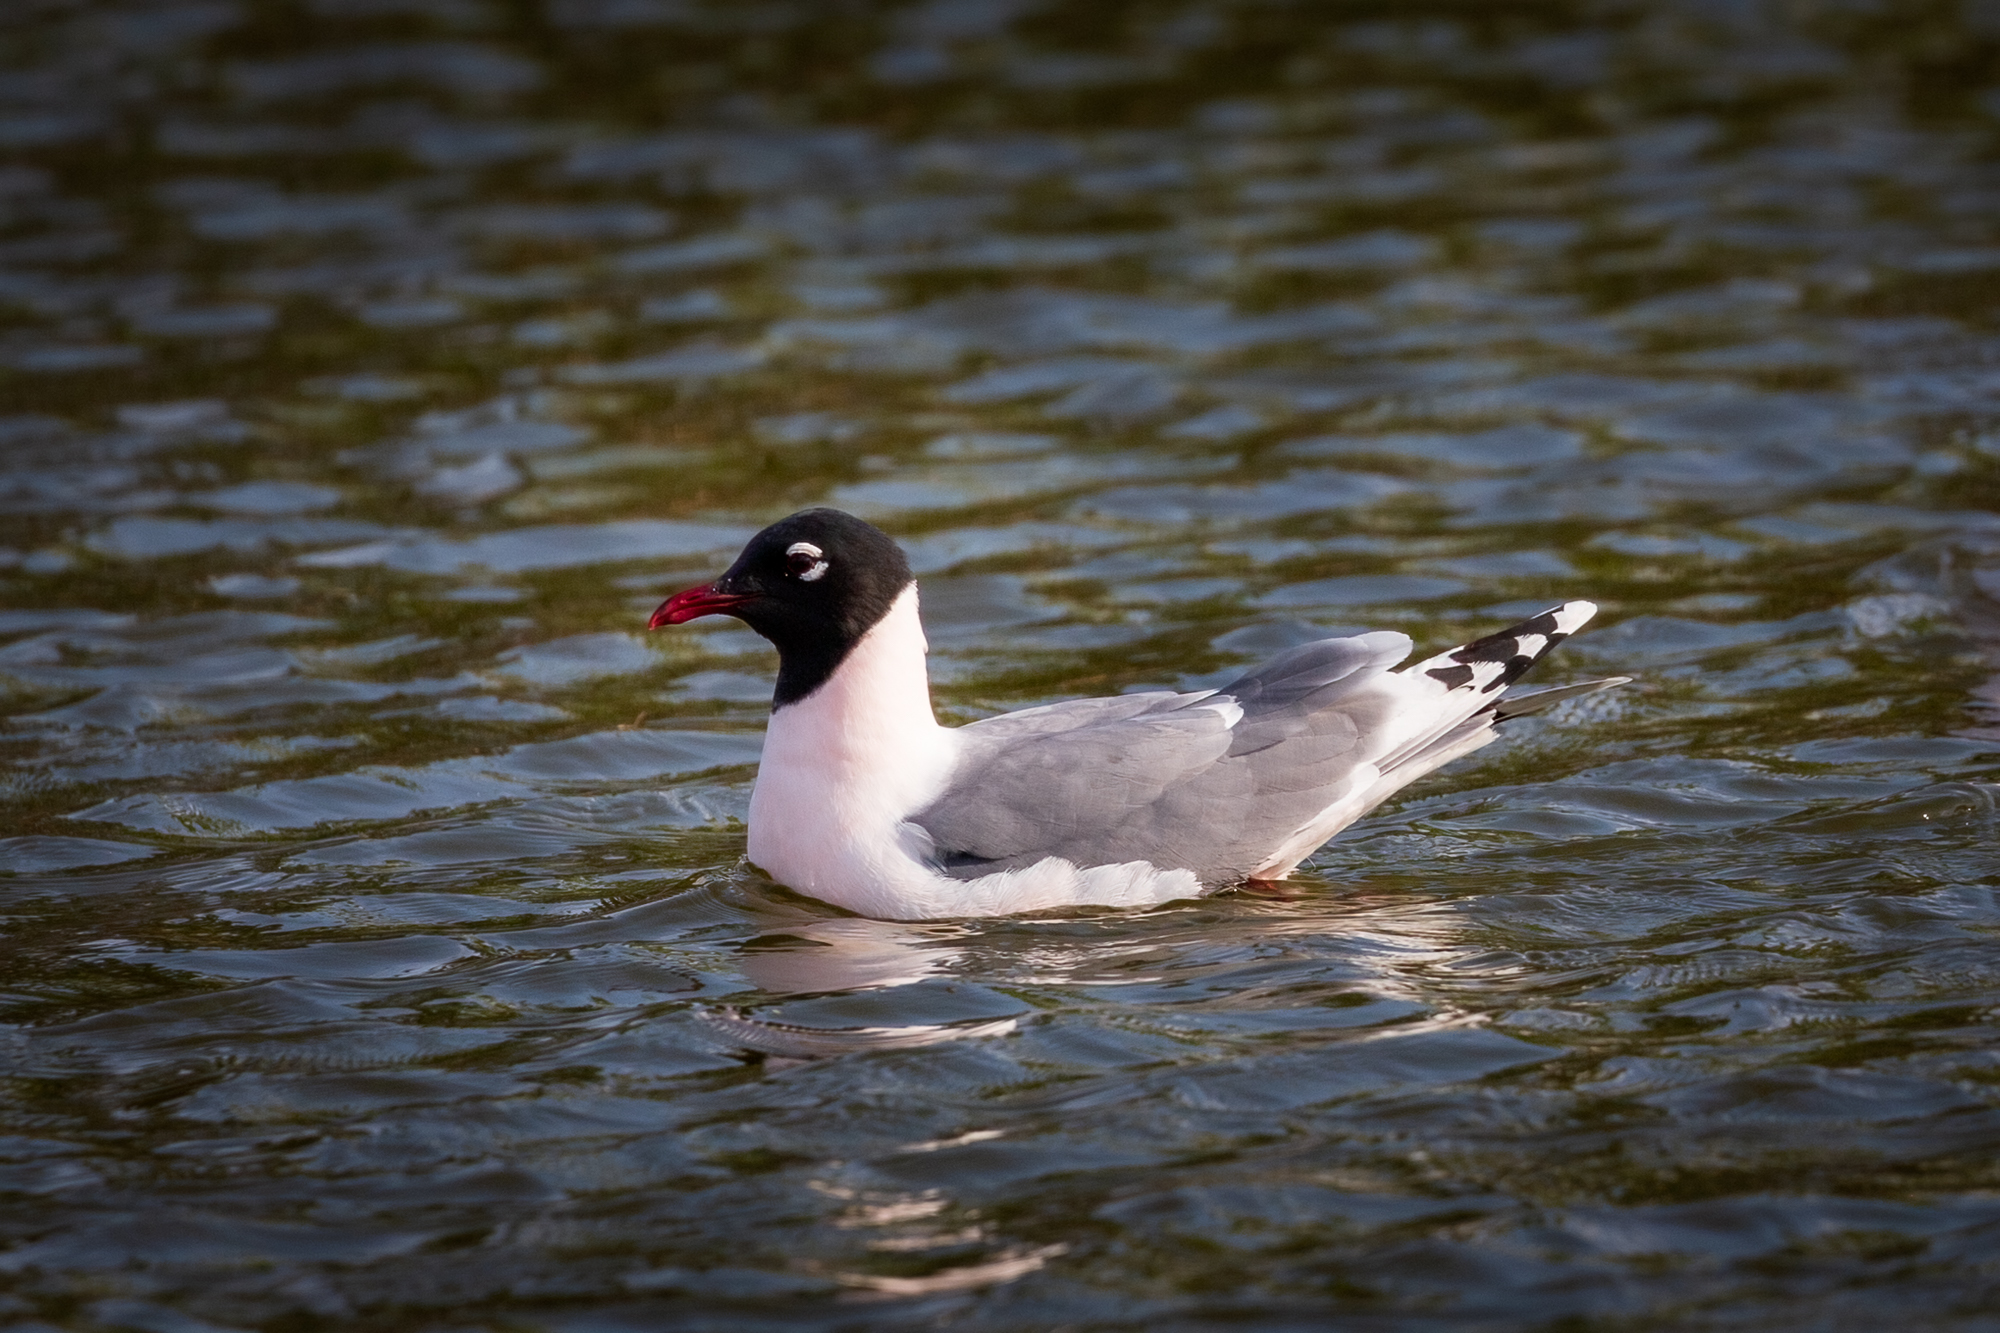 Franklin's Gull swimming in a pond